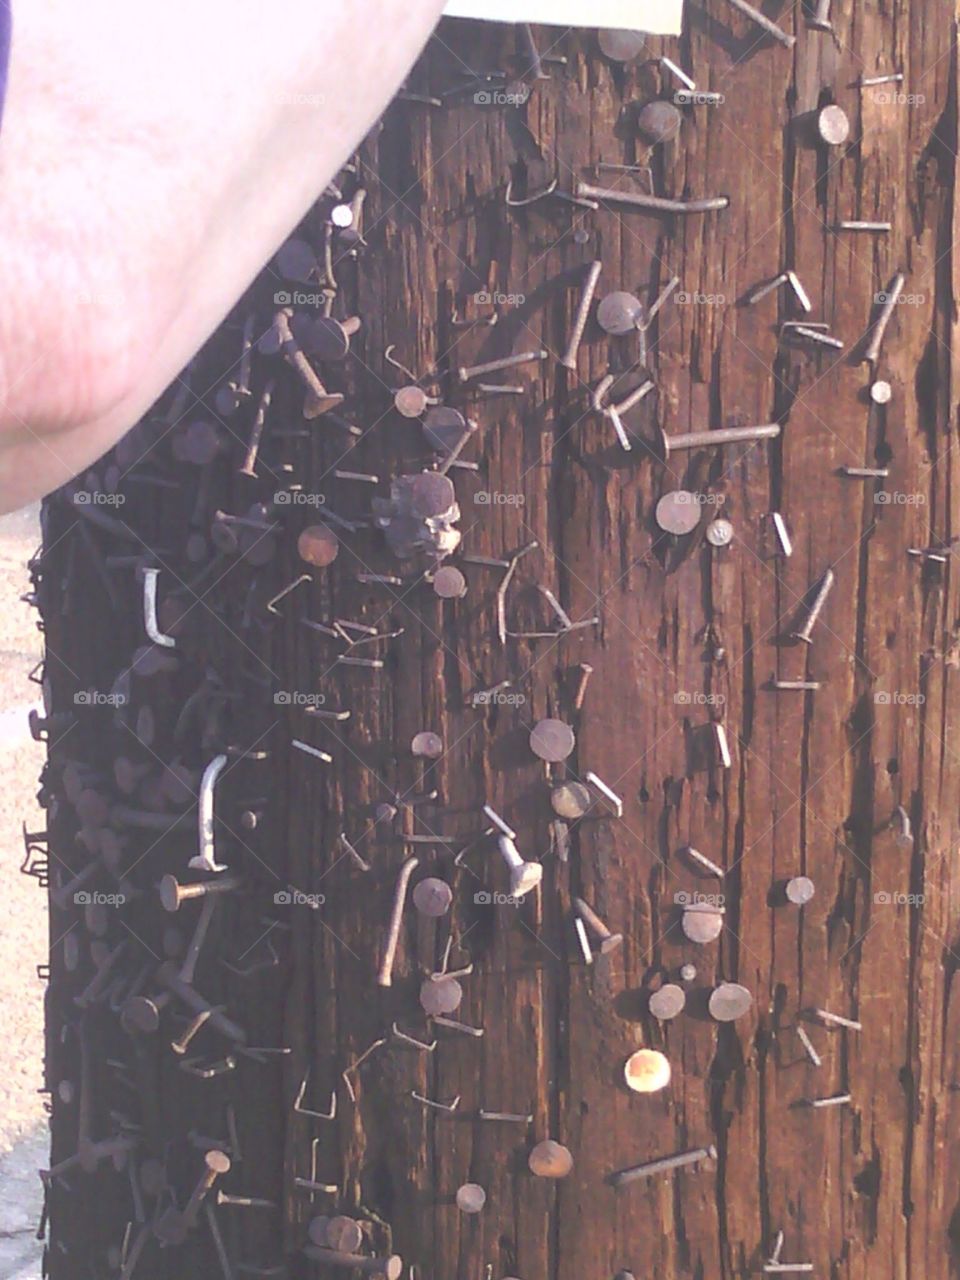 Too many garage sales?. Light post overloaded with nails